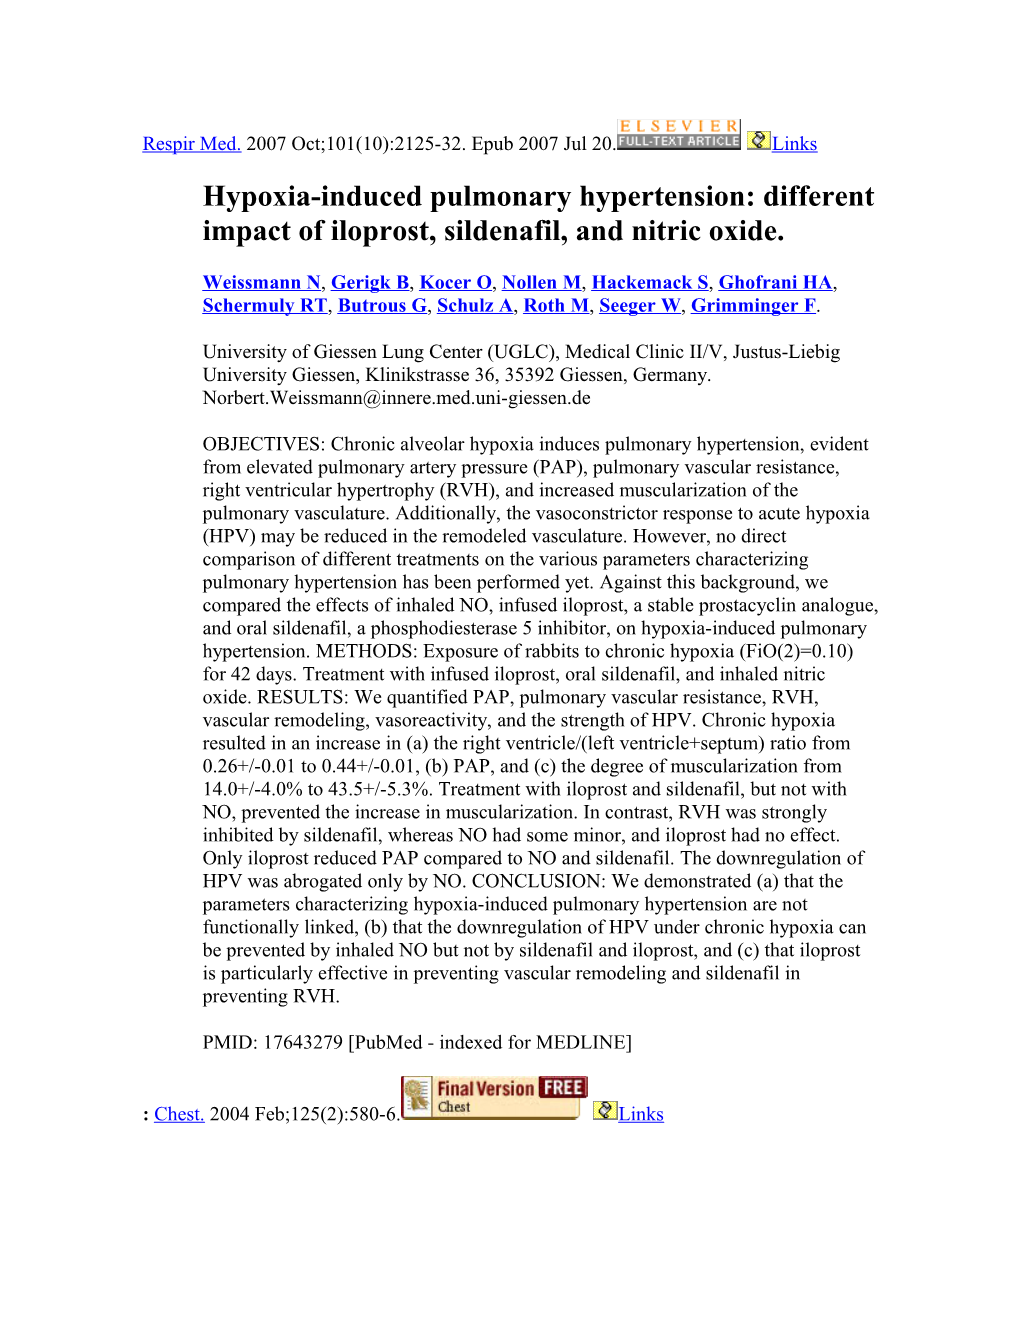 Hypoxia-Induced Pulmonary Hypertension: Different Impact of Iloprost, Sildenafil, and Nitric